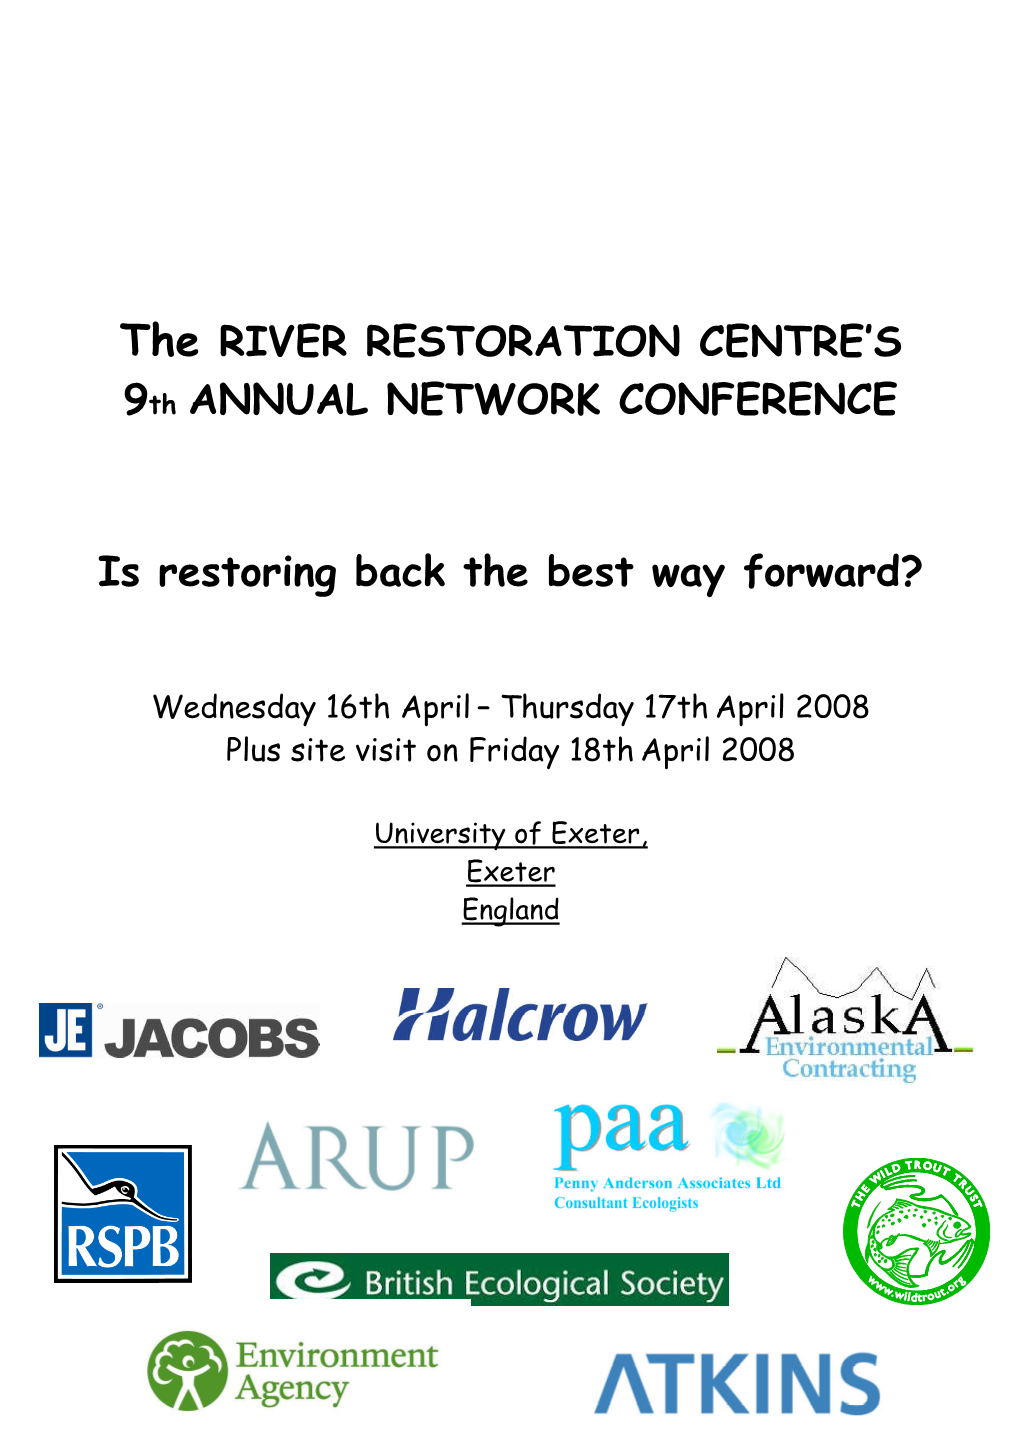 The RIVER RESTORATION CENTRE's 9Th ANNUAL NETWORK CONFERENCE Is Restoring Back the Best Way Forward?